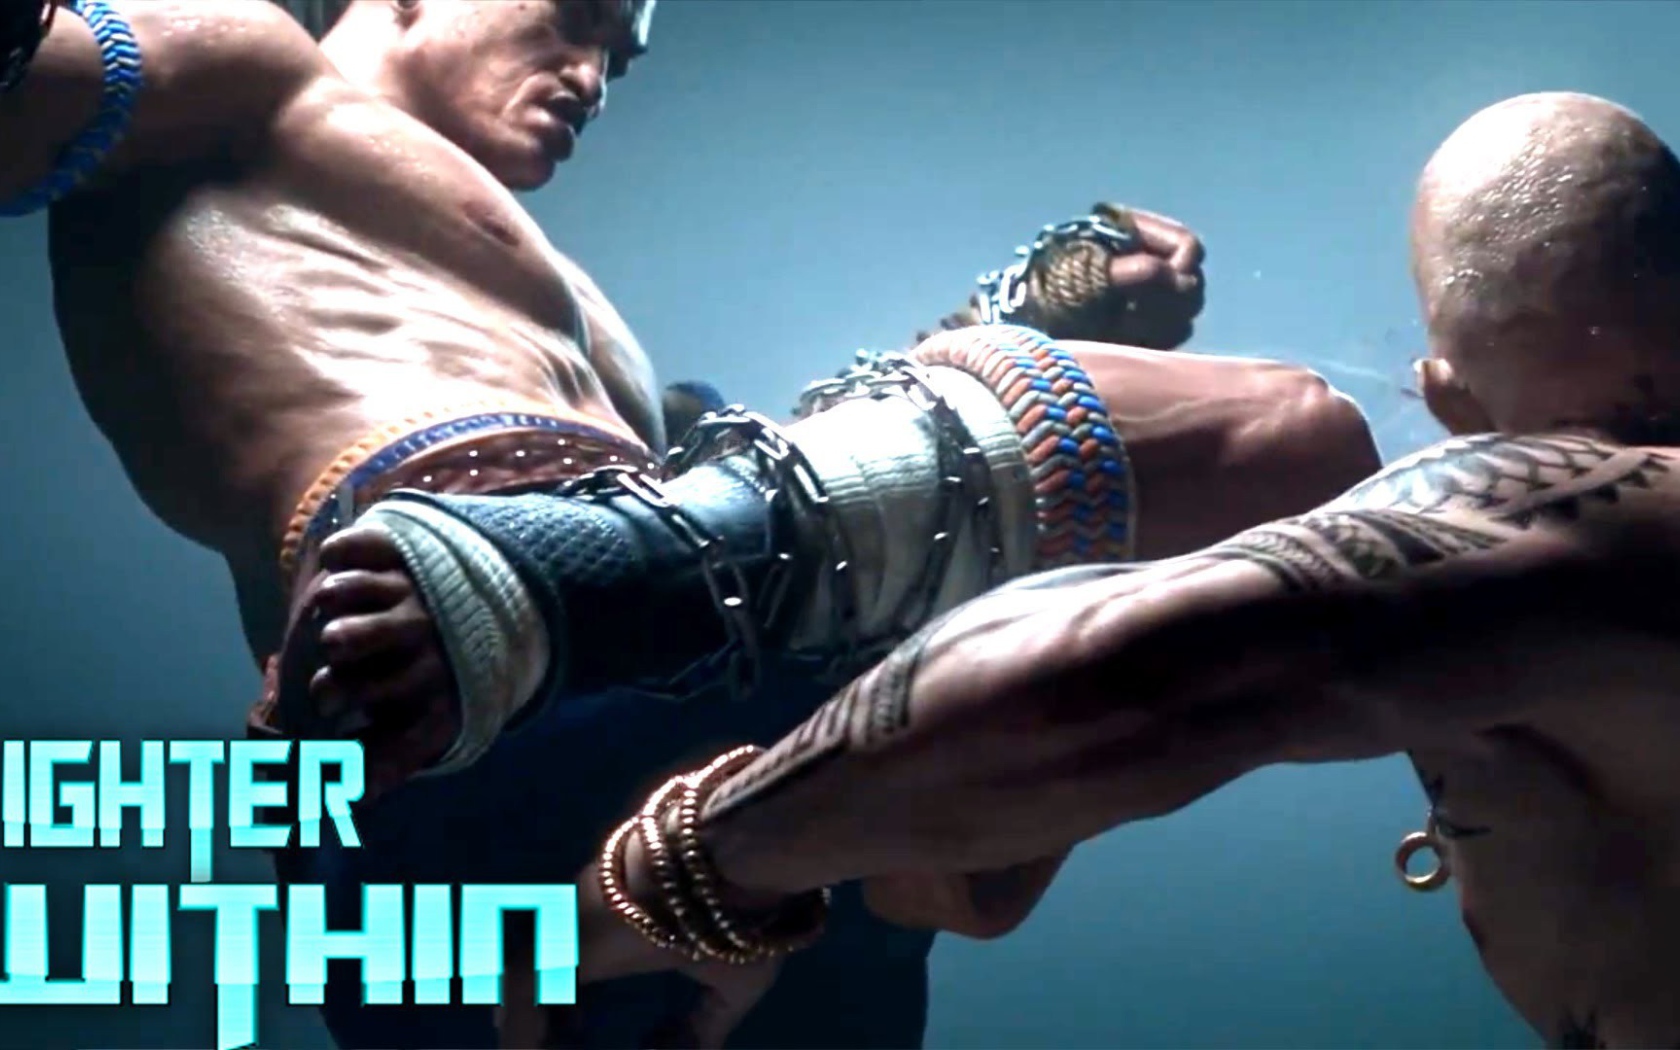 Fighter Within game exclusive for Xbox One